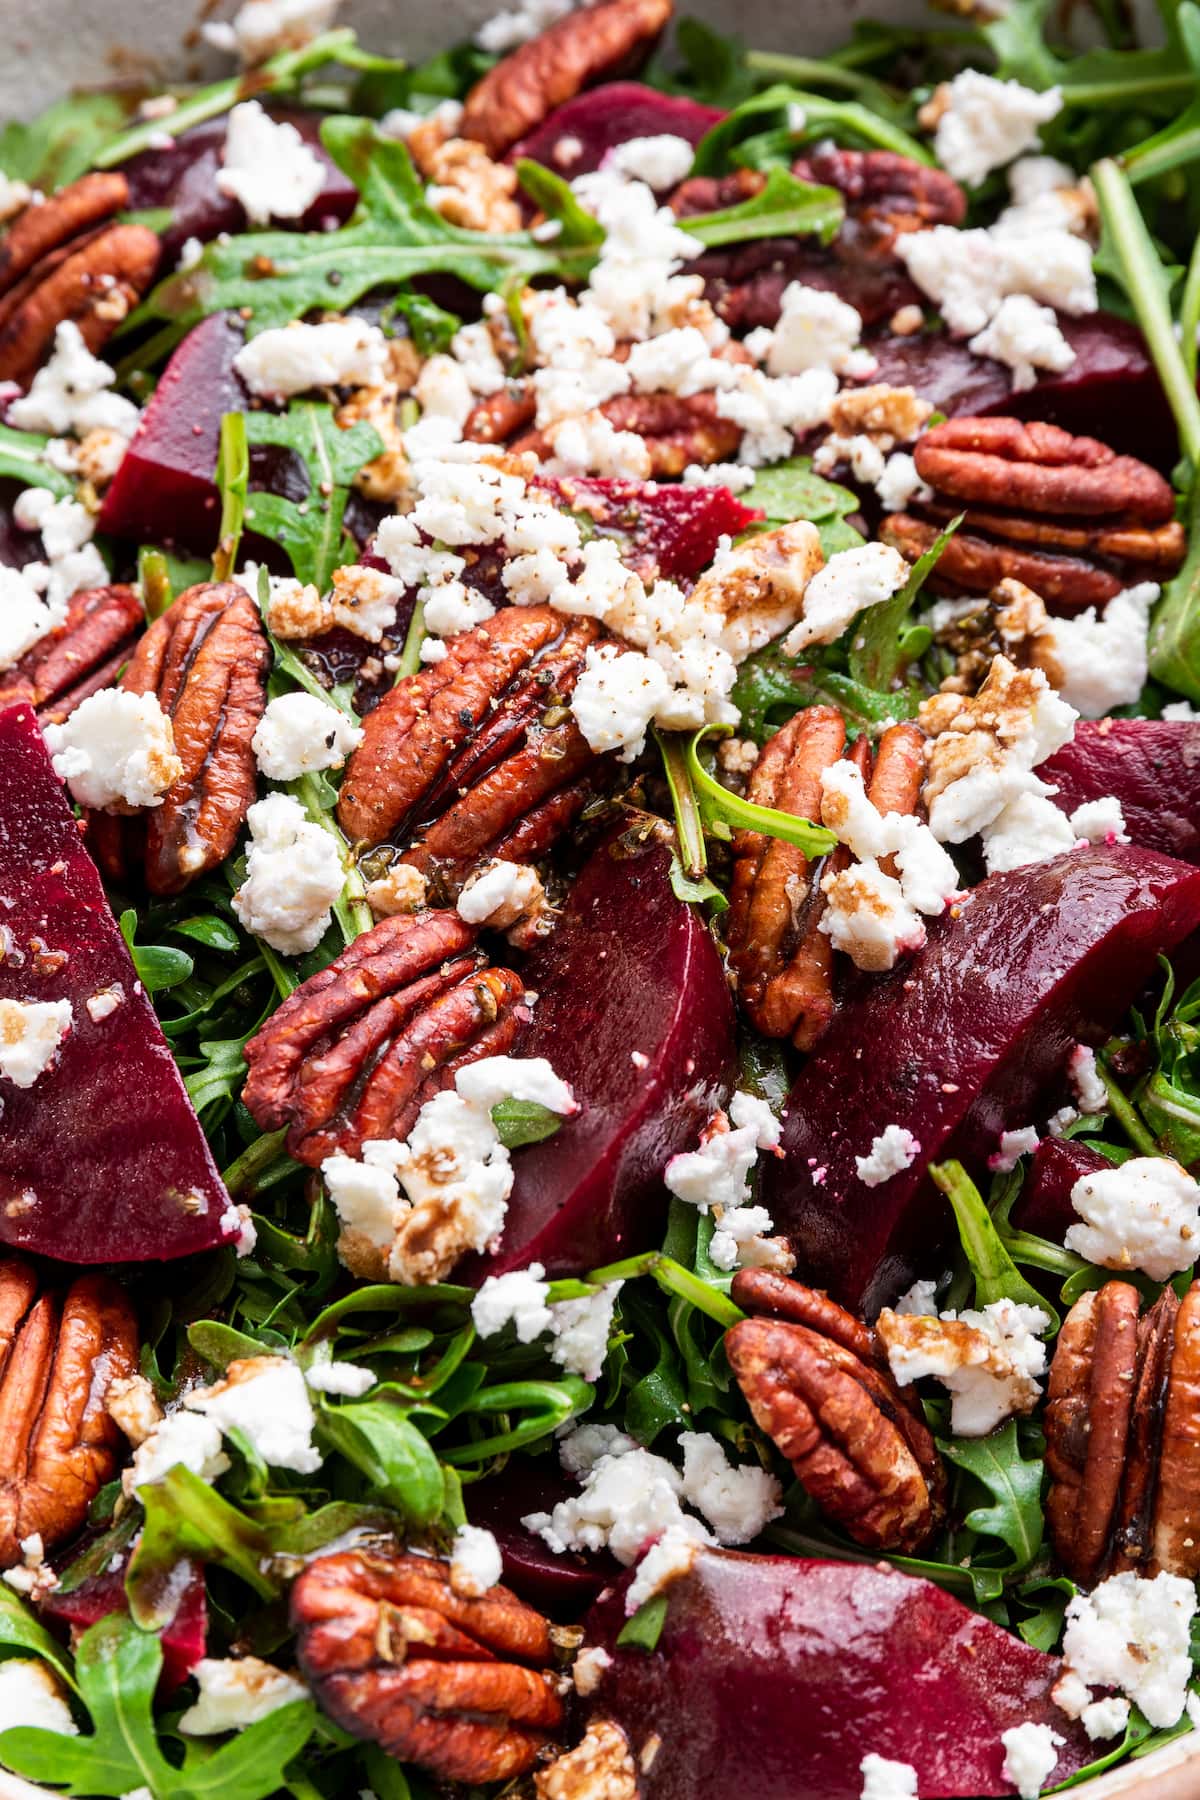 A beet salad with arugula, pecans, and crumbled feta in a bowl.